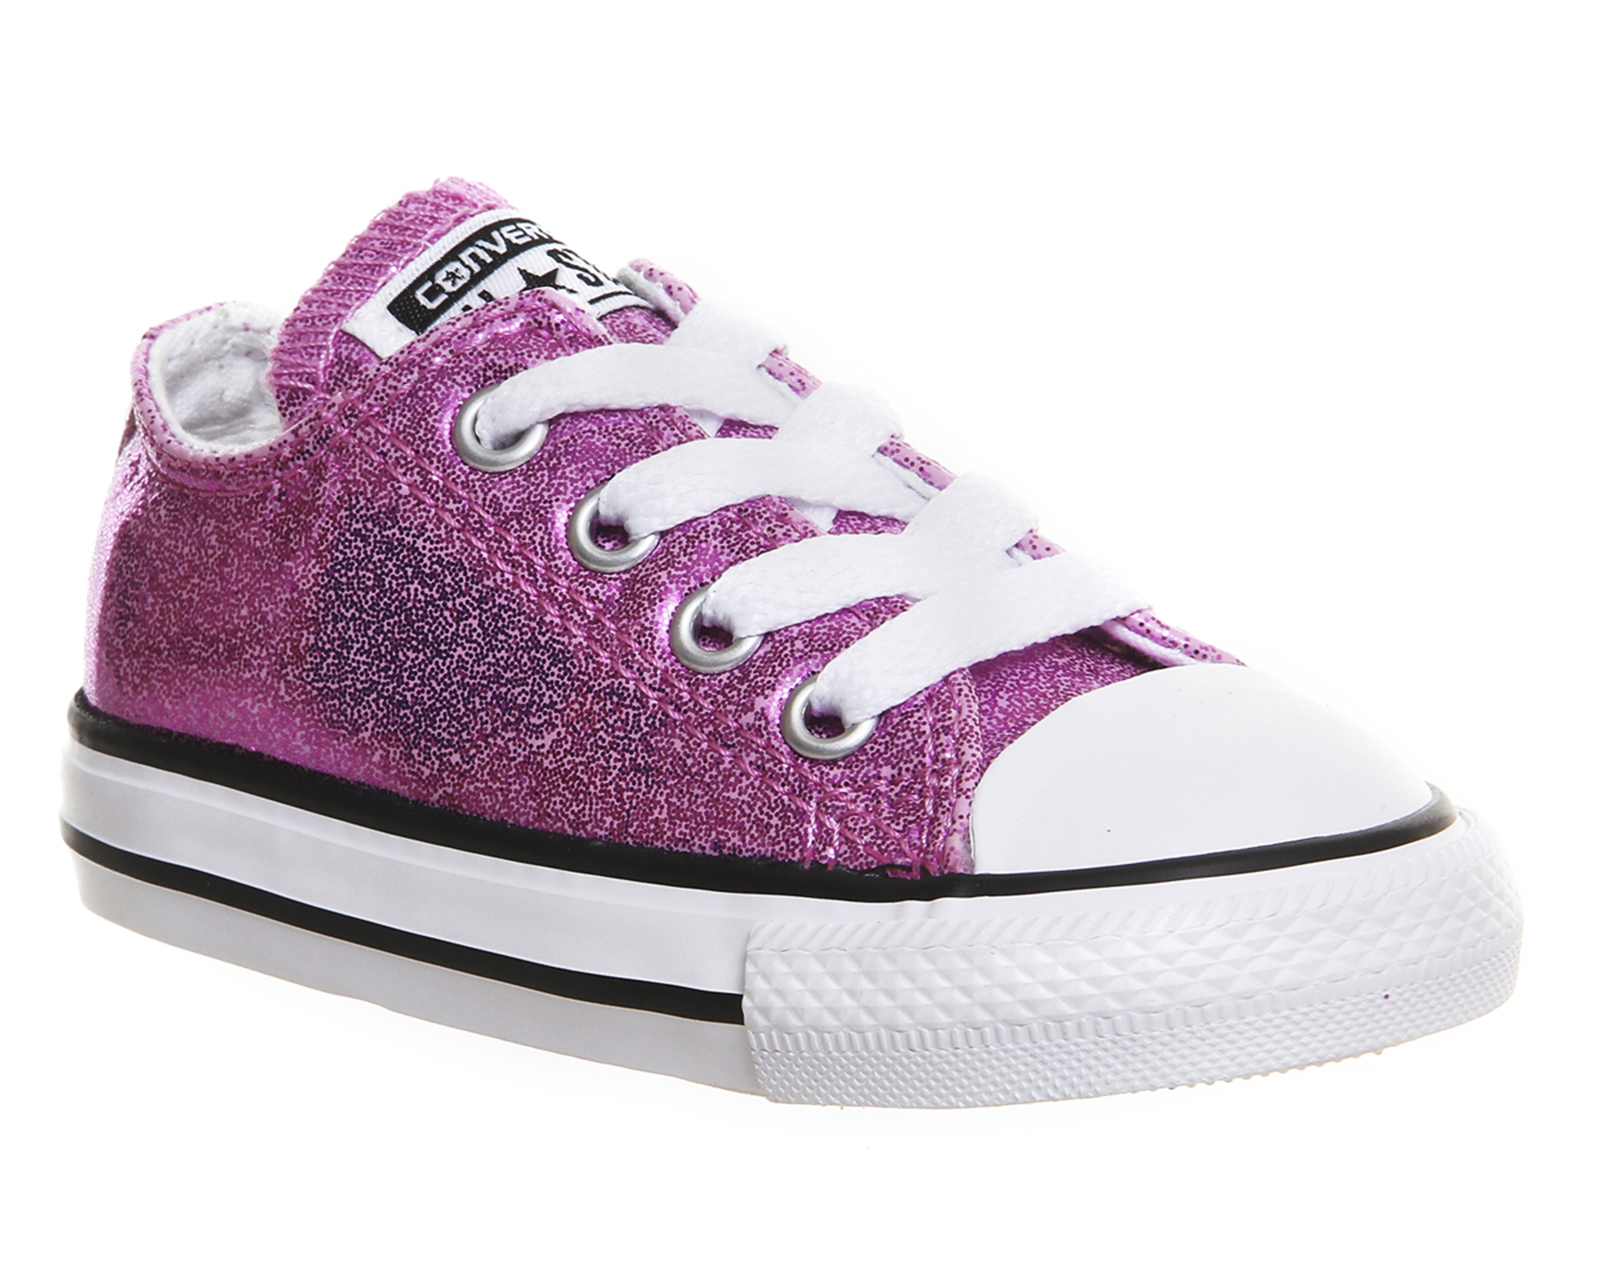 Converse Pink All Star Ox Glitter Hotsell, 55% OFF | empow-her.com